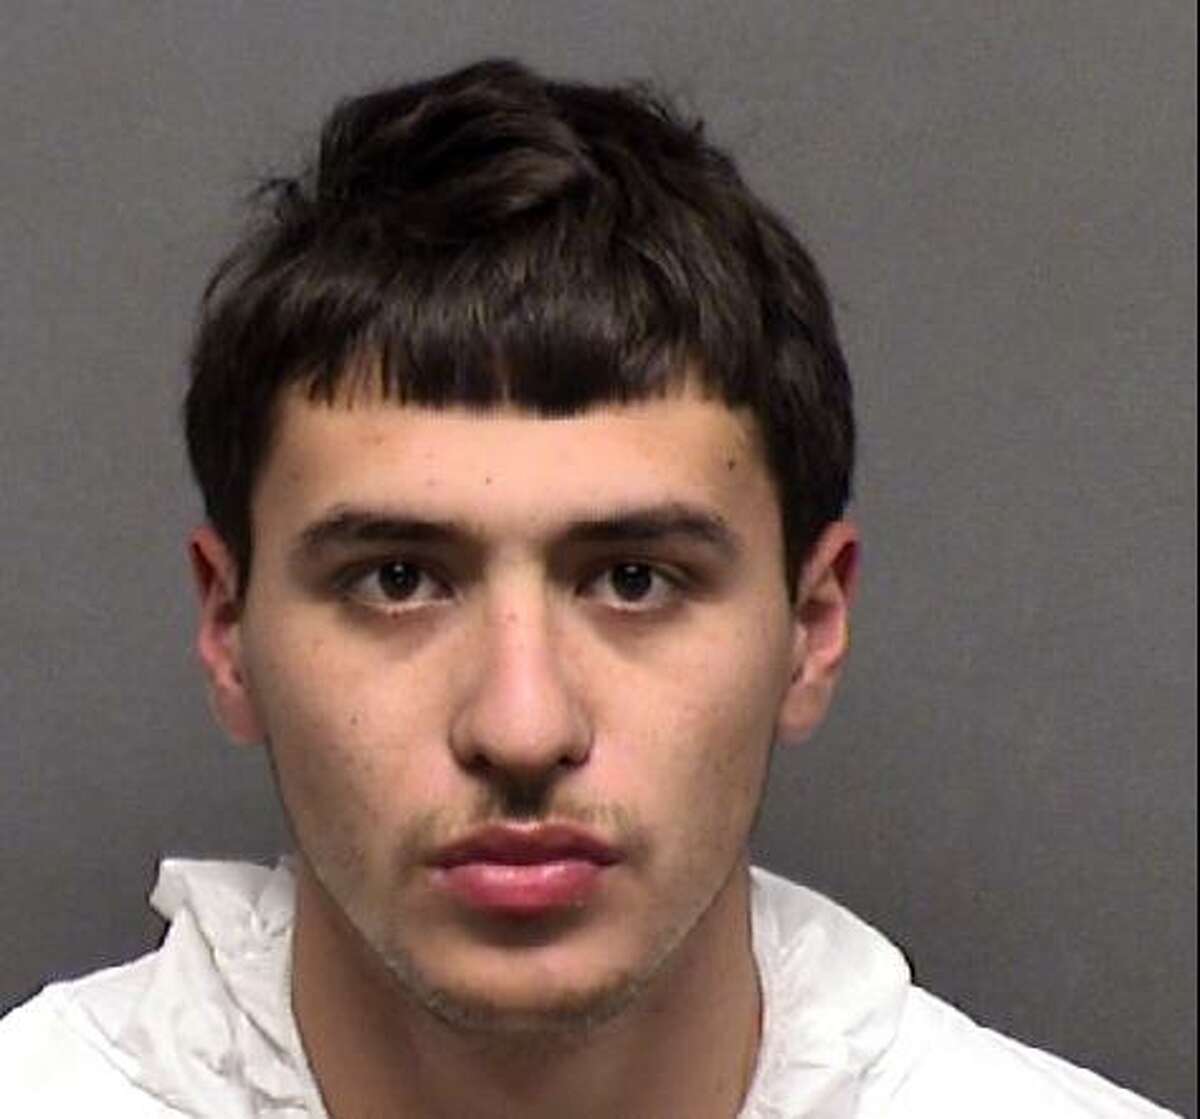 Michael Montoya has been indicted on a murder charge in connection with the fatal shooting of Paul Butler on March 13, 2022.